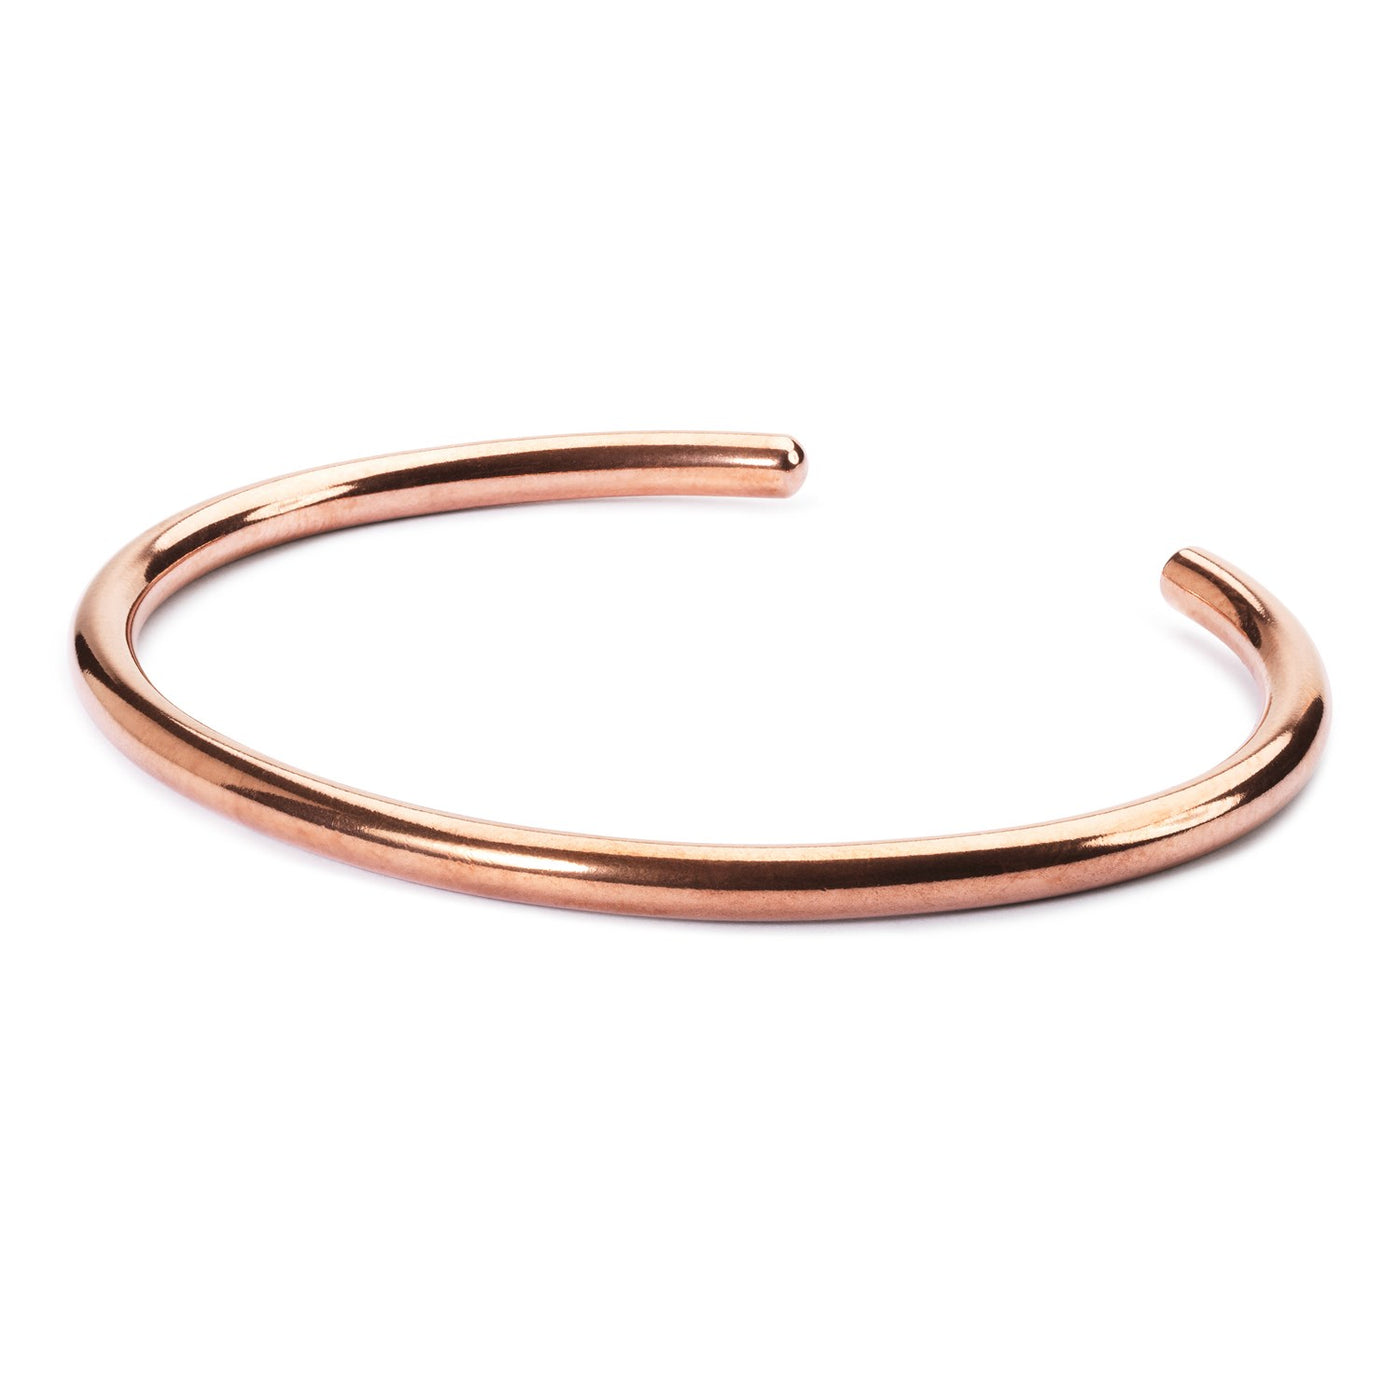 Copper bangle, providing a simple and classic base for your Trollbeads bracelet.